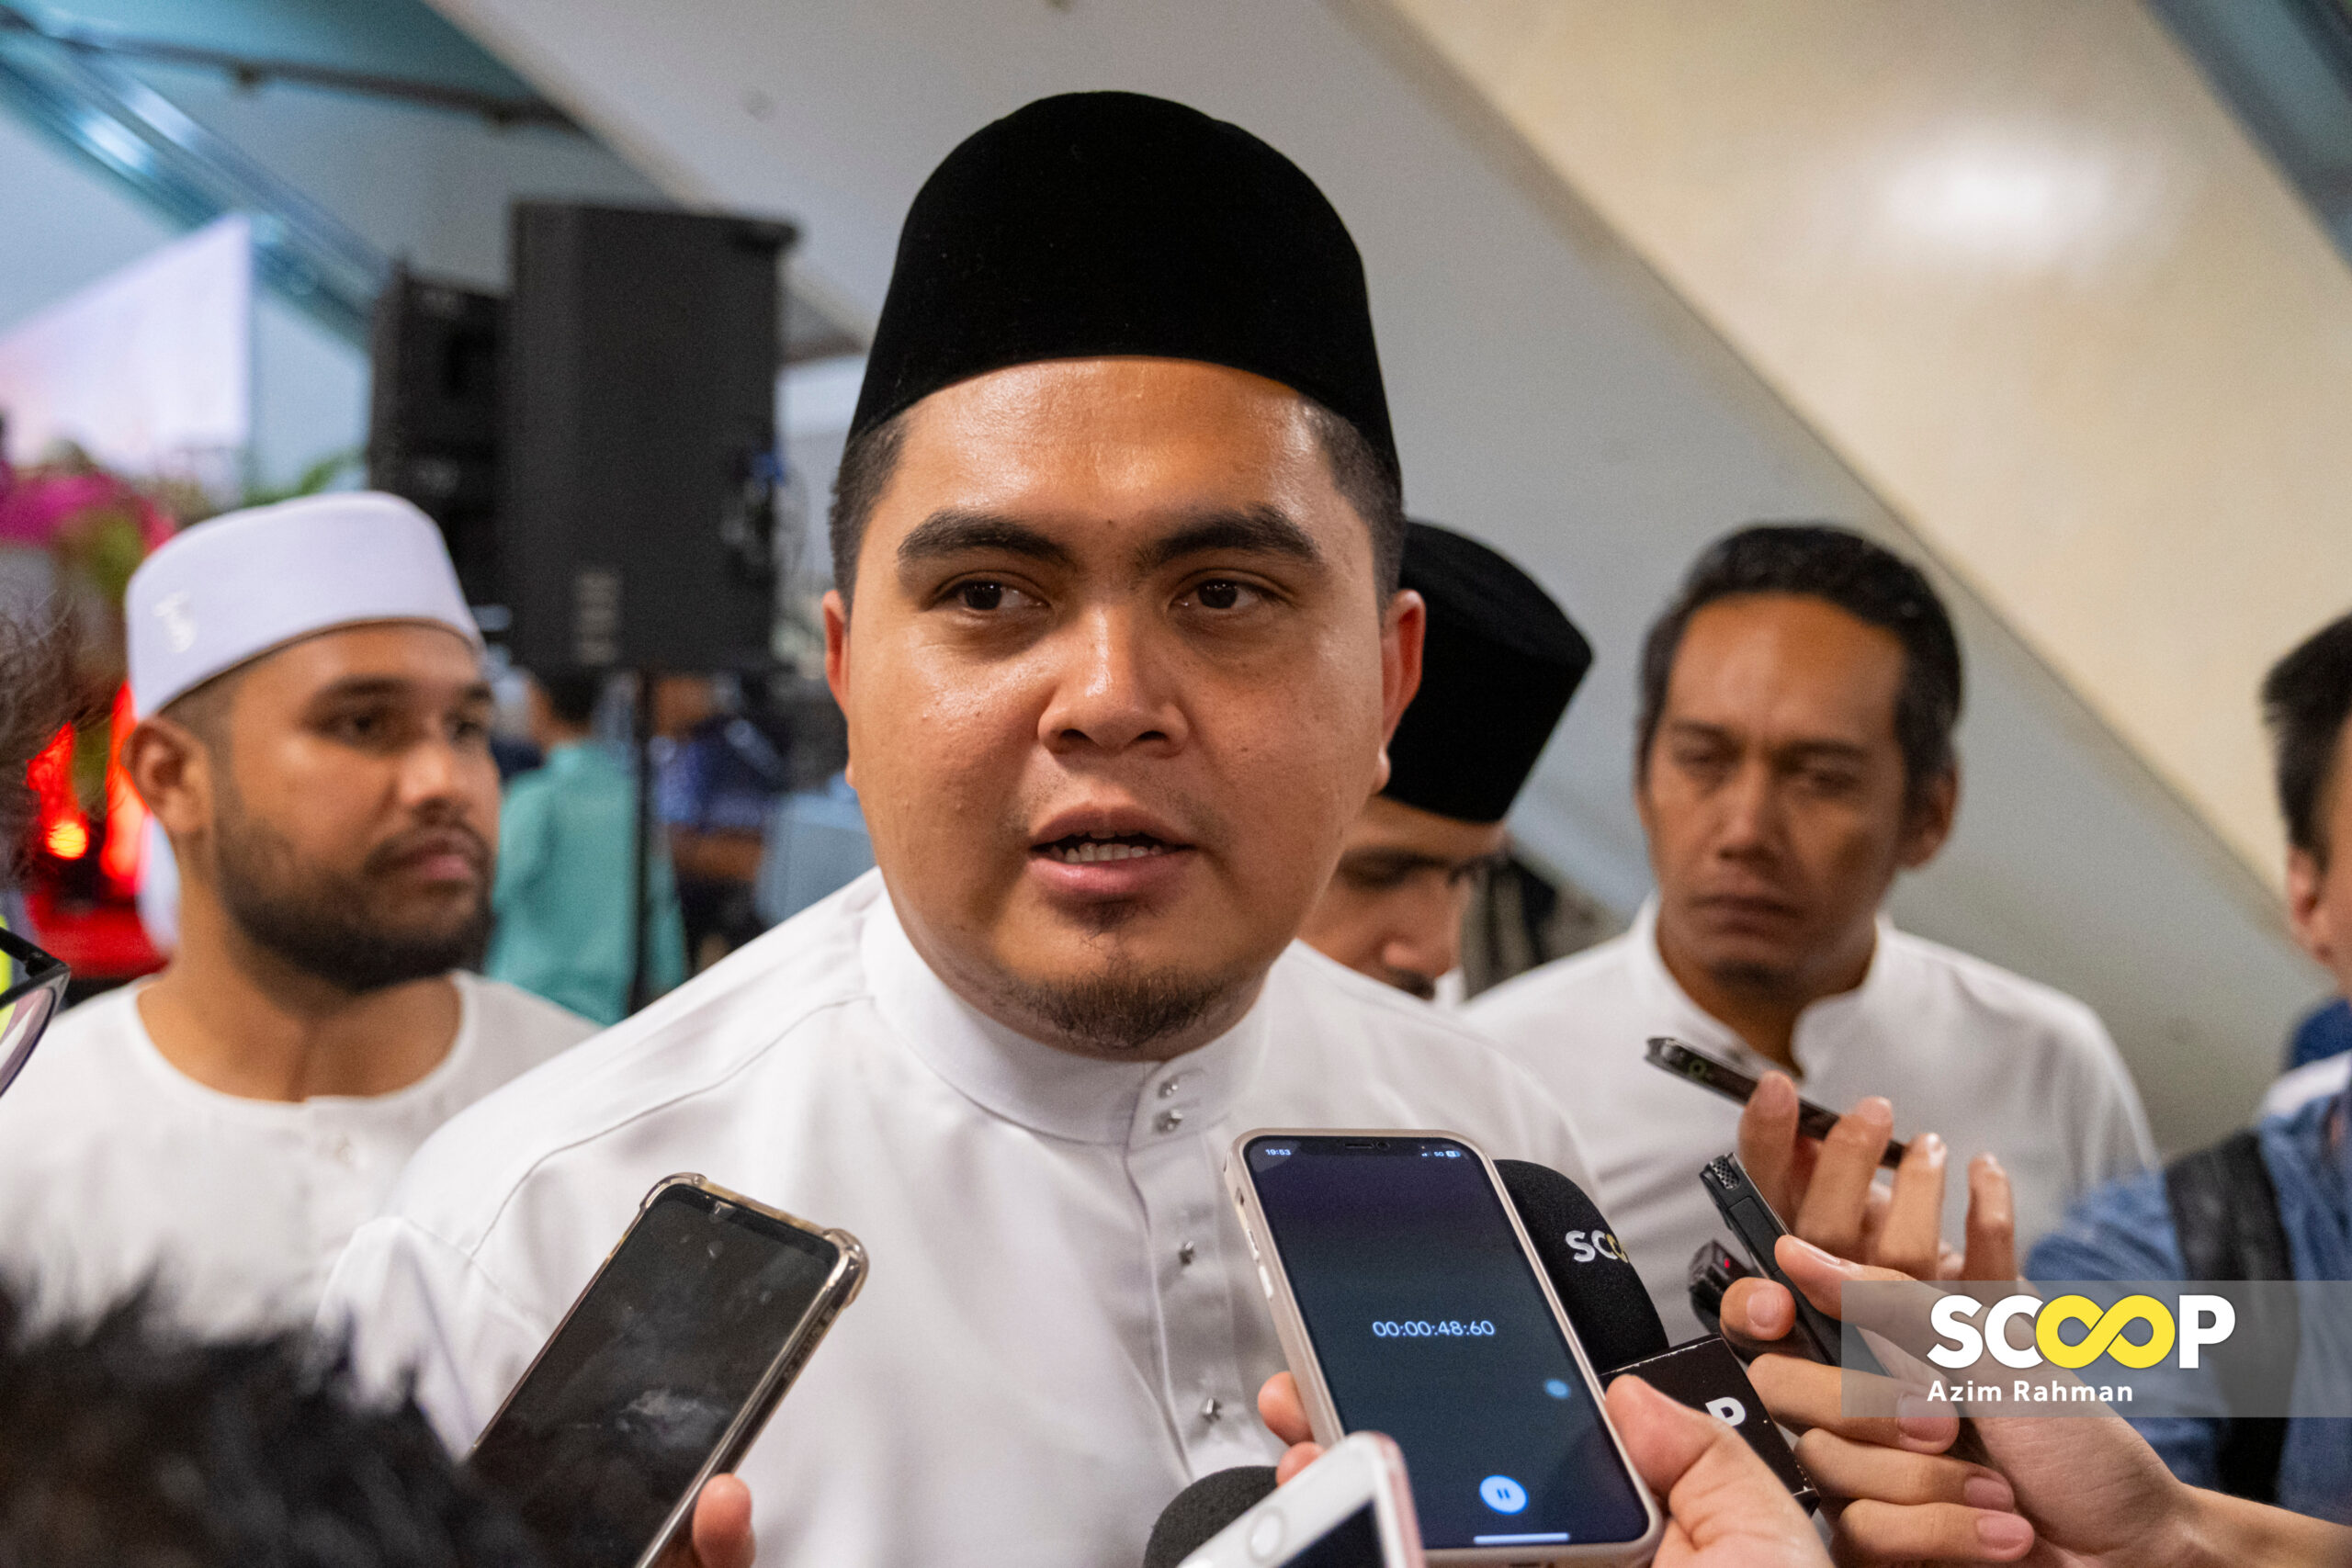 Controversy continues: Akmal detained upon arrival at Kota Kinabalu airport